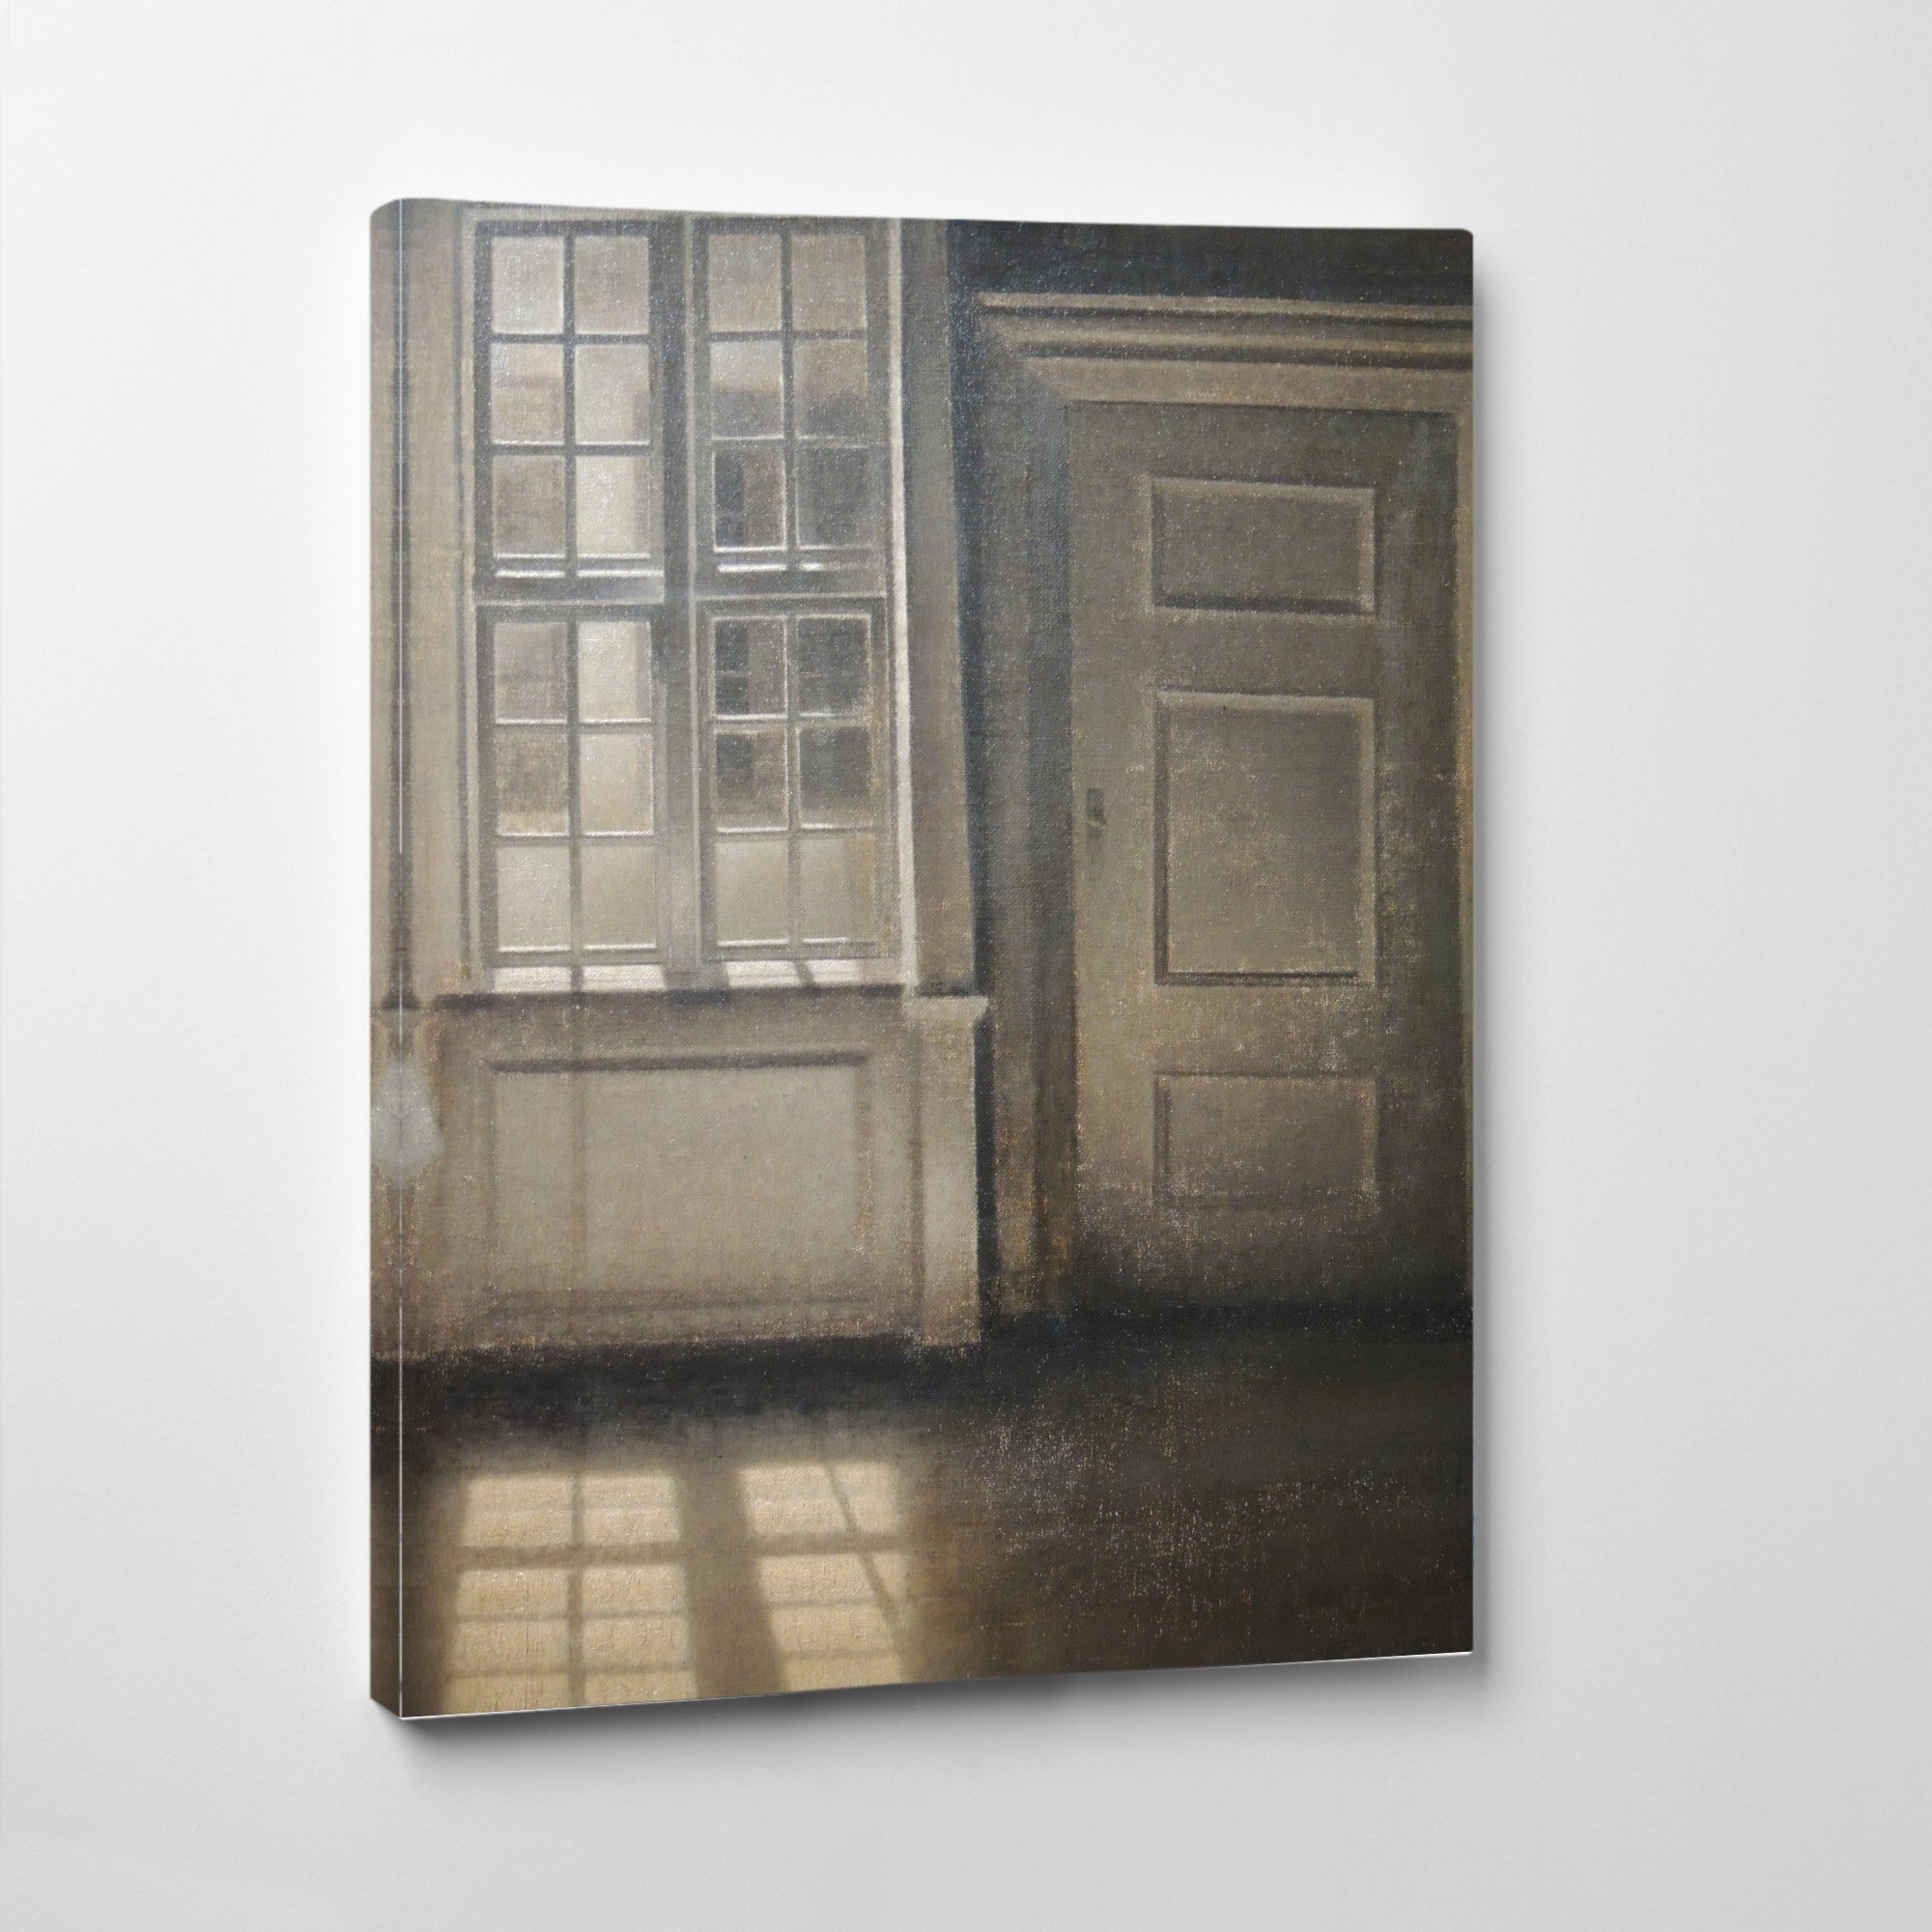 Vilhelm Hammershoi, Interior, Sunlight on the Floor, Gallery Quality Canvas Reproduction